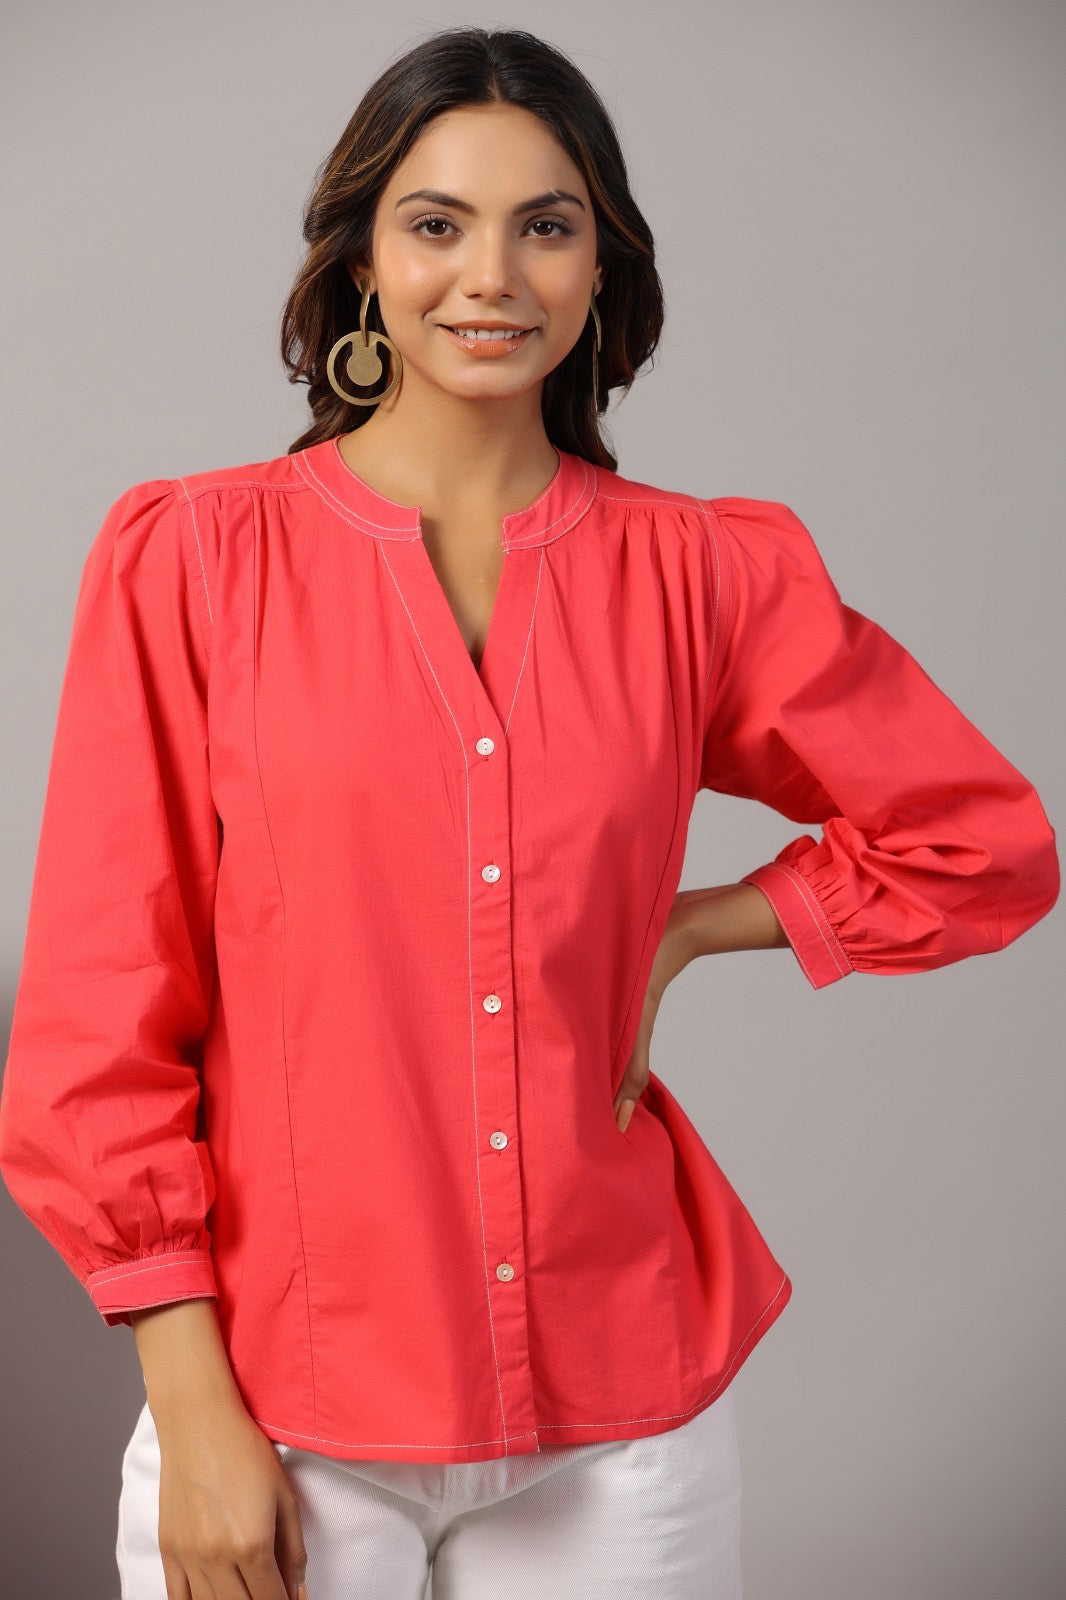 Coral Red Color Top